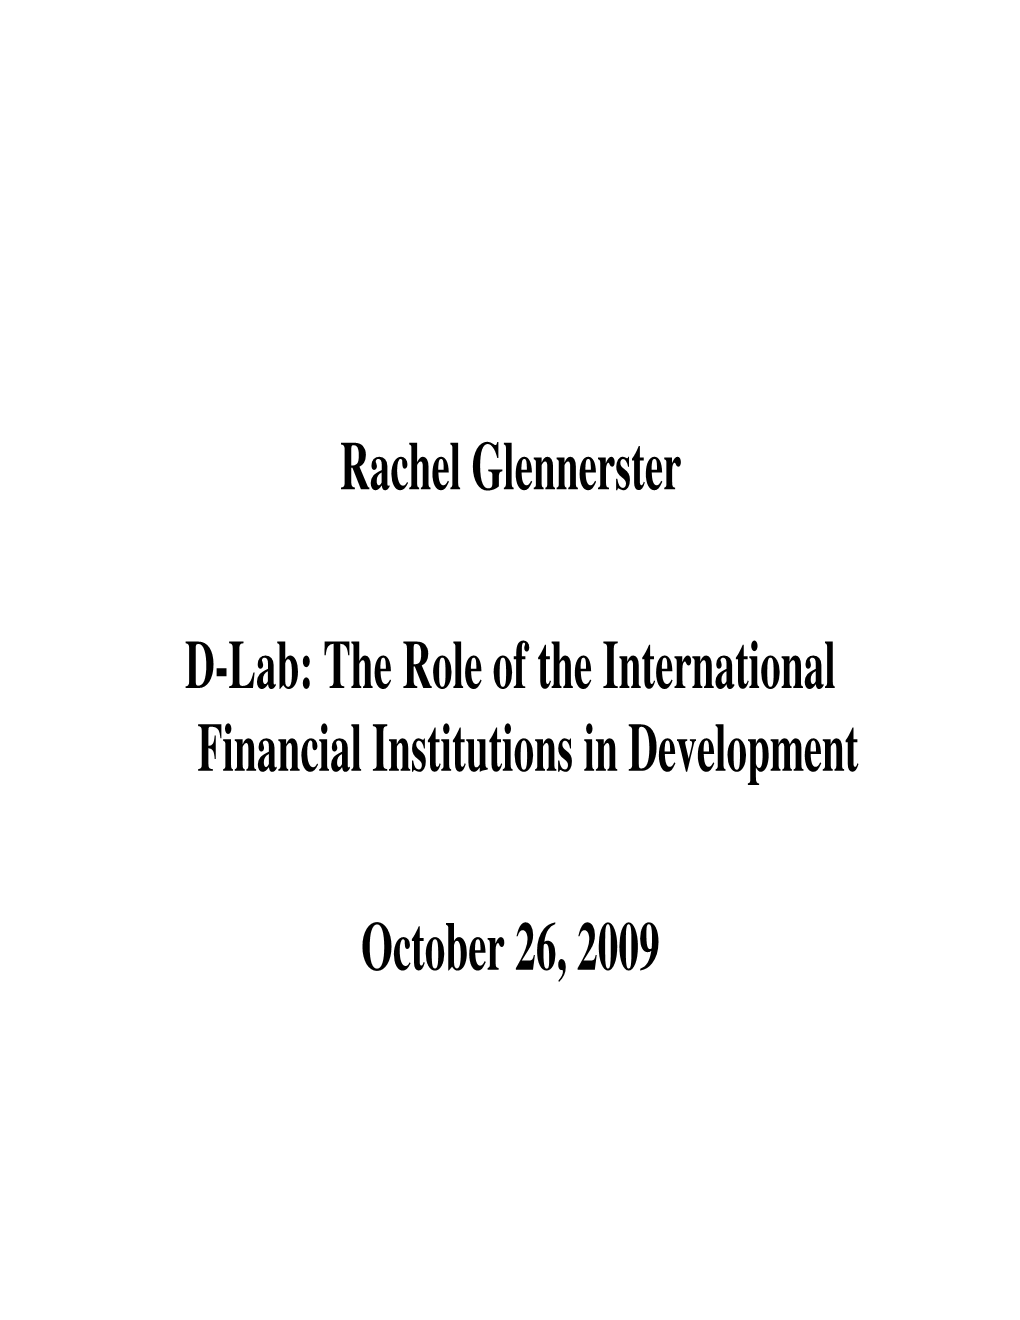 The Role of the International Financial Institutions in Development